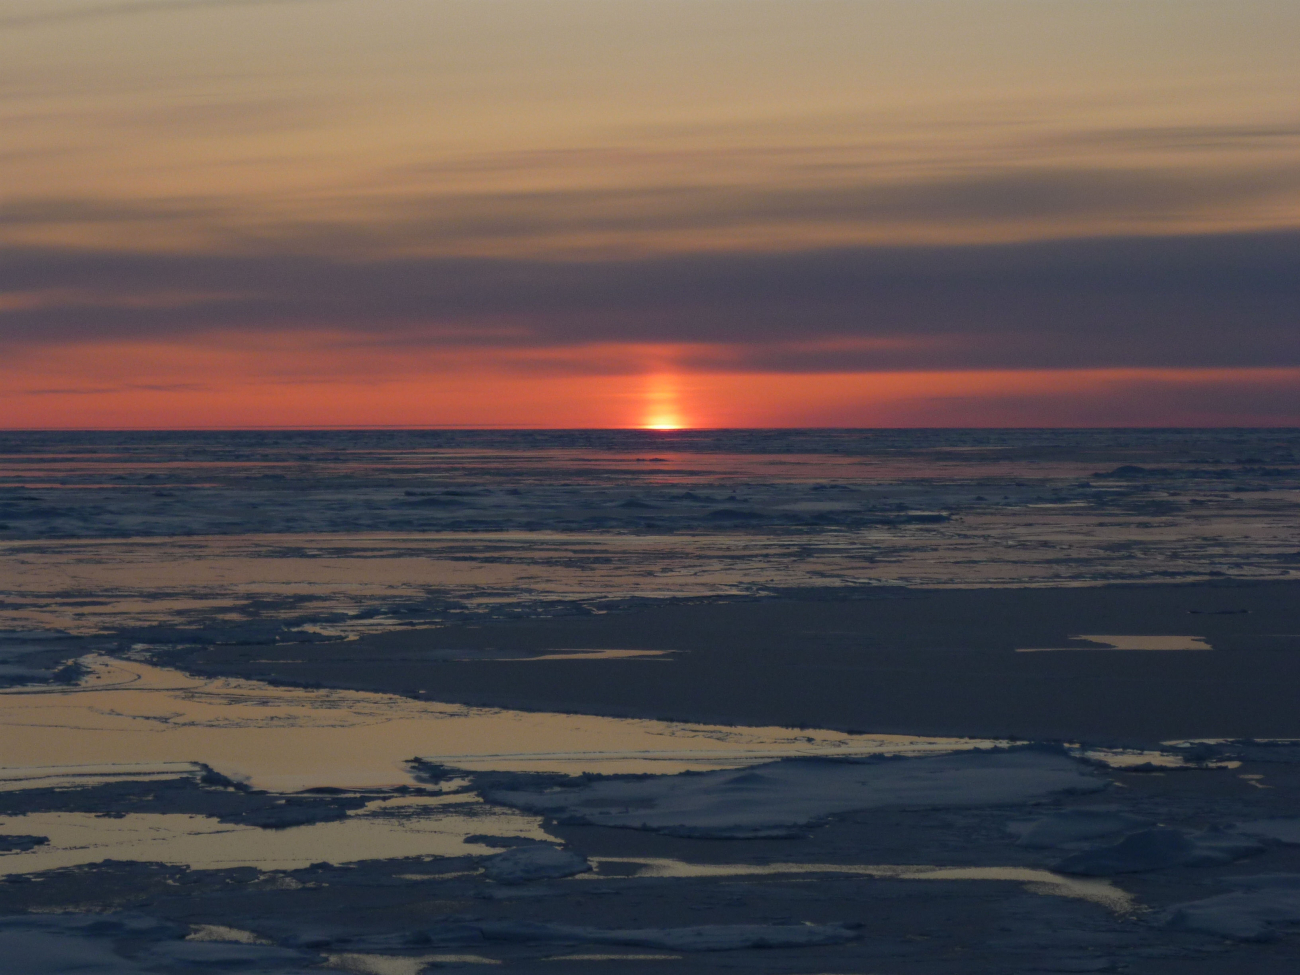 A sun pillar as sun dips below the horizon with ice floes and new ice